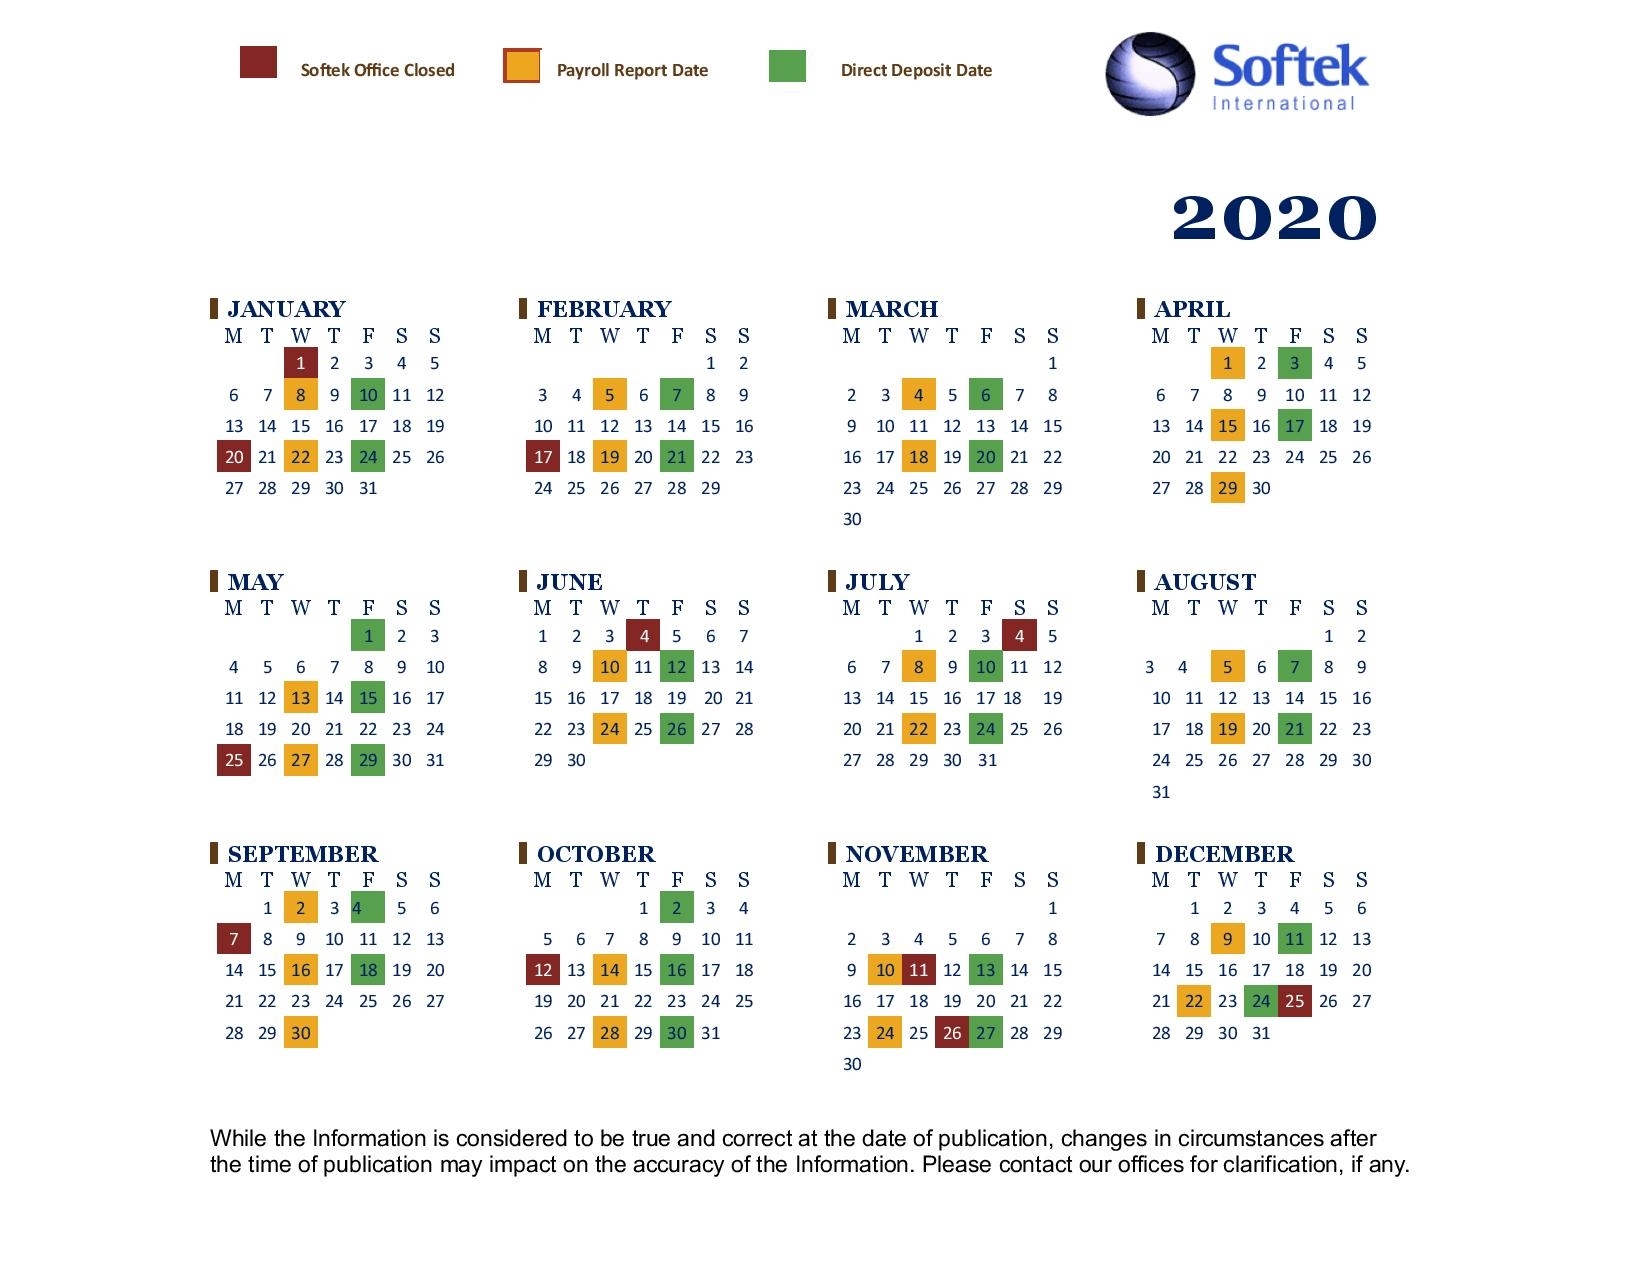 Softek Holiday &amp; Payroll Calendar | Softekintl intended for Federal Pay Periods 2020 Schedule